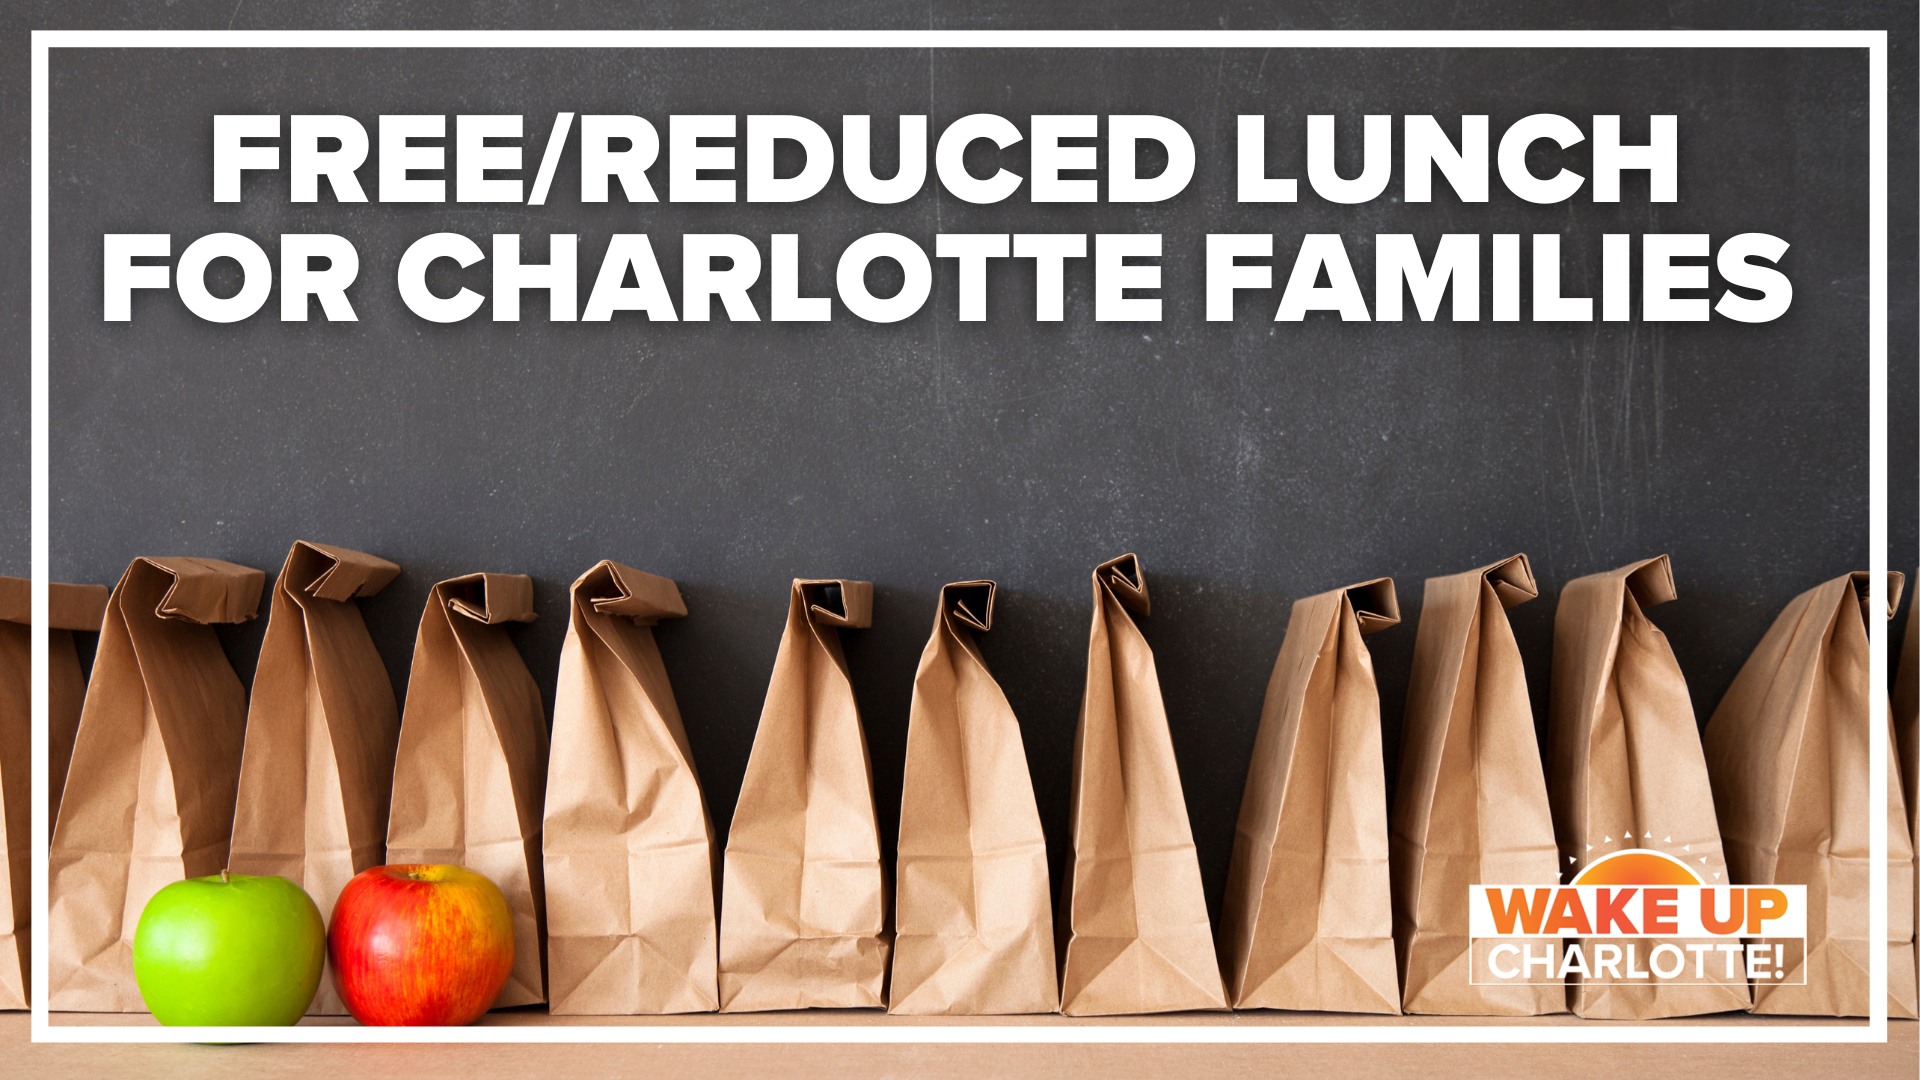 Families of CMS students can now start applying for free or reduced-cost school lunches. Only one application needs to be submitted per family